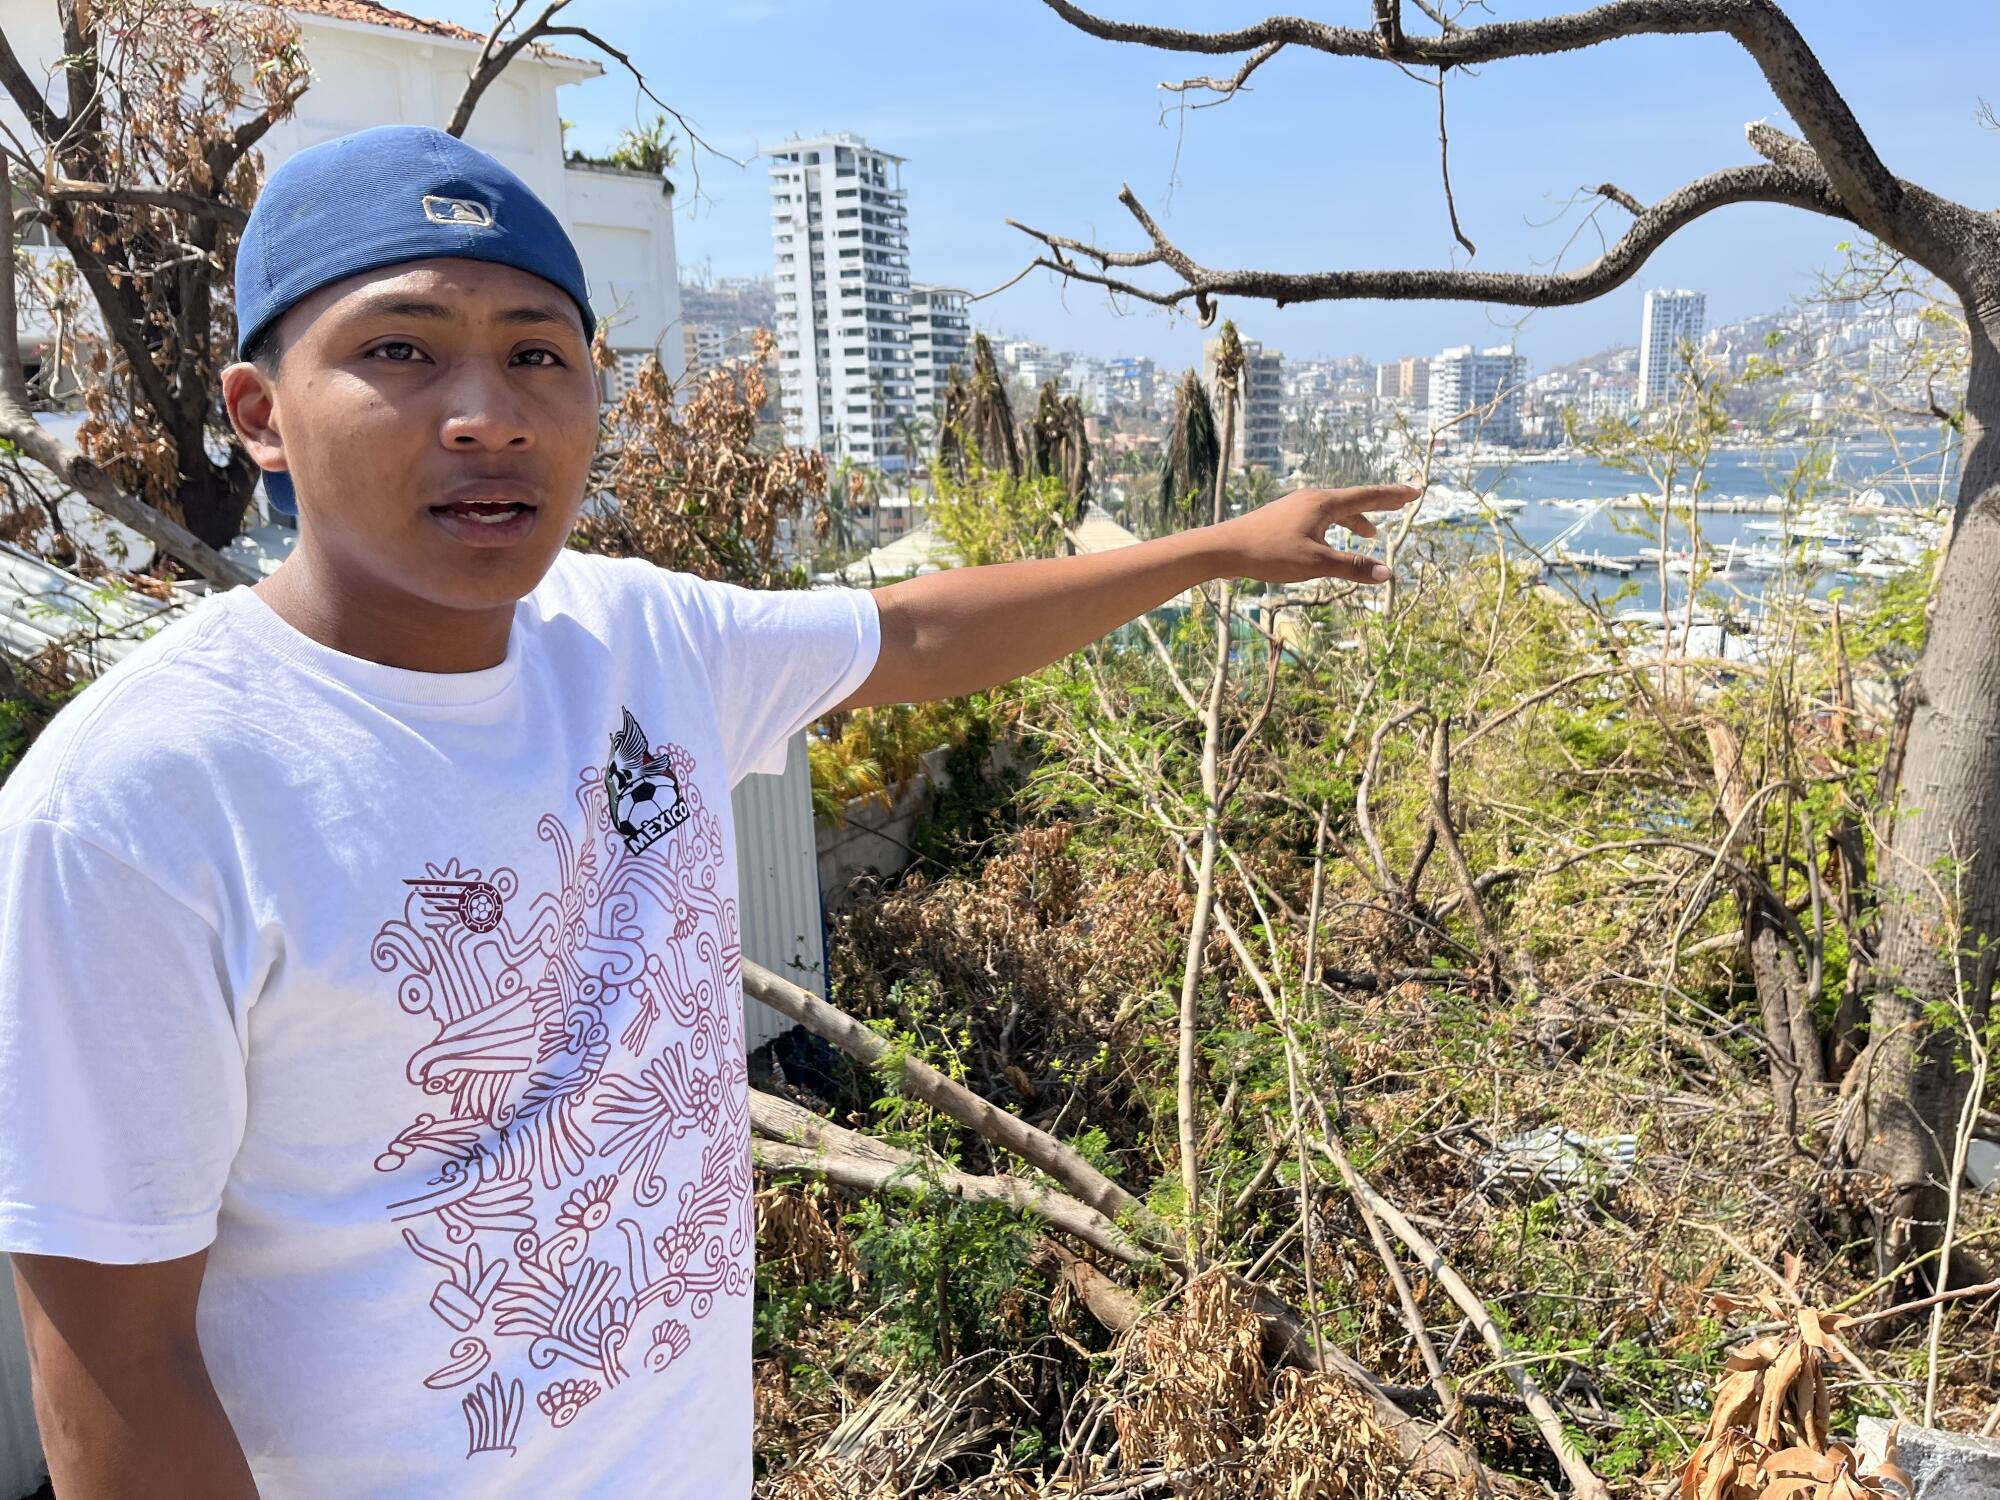 A young man points toward the bay in Acapulco